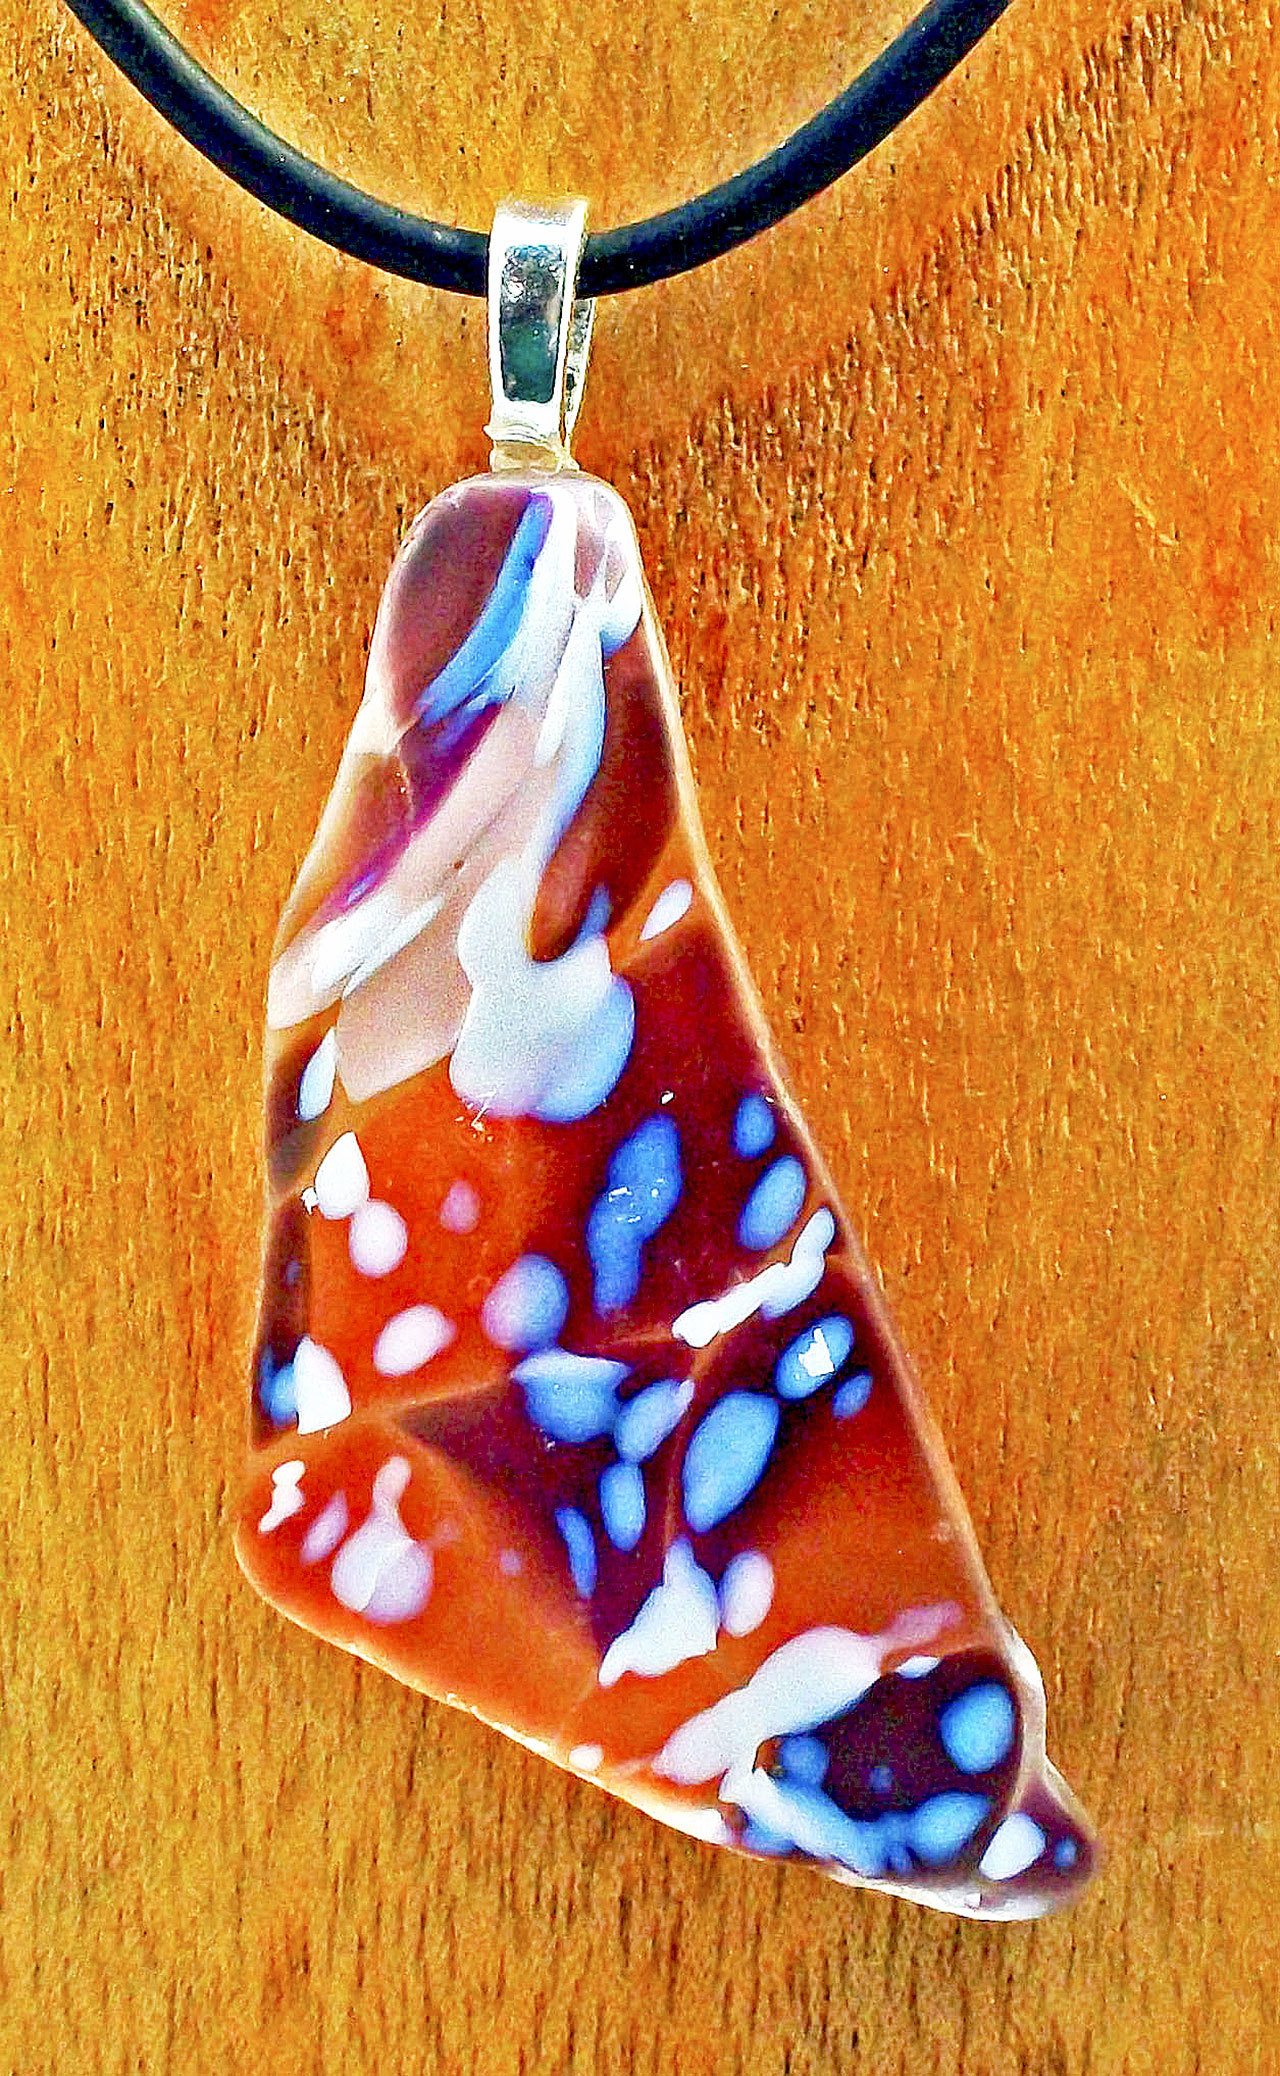 During Gallery Walk, this recycled glass pendant crafted by Nancy Rody will be on display at Gallery 9, 1012 Water St. — Nancy Rody.